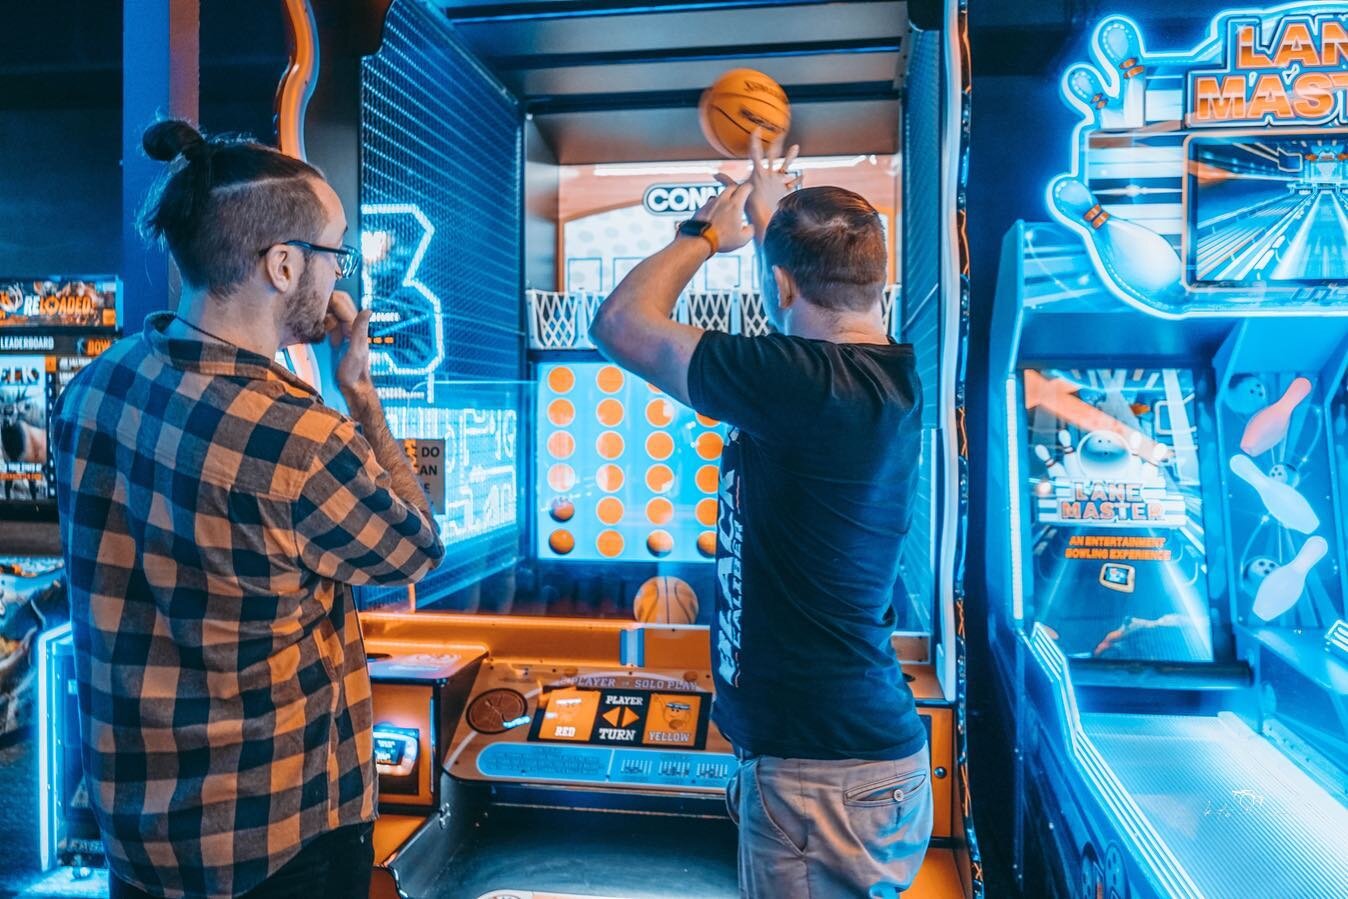 This game of connect 4 hoops was a real nail biter😟
📸 @kto.rw